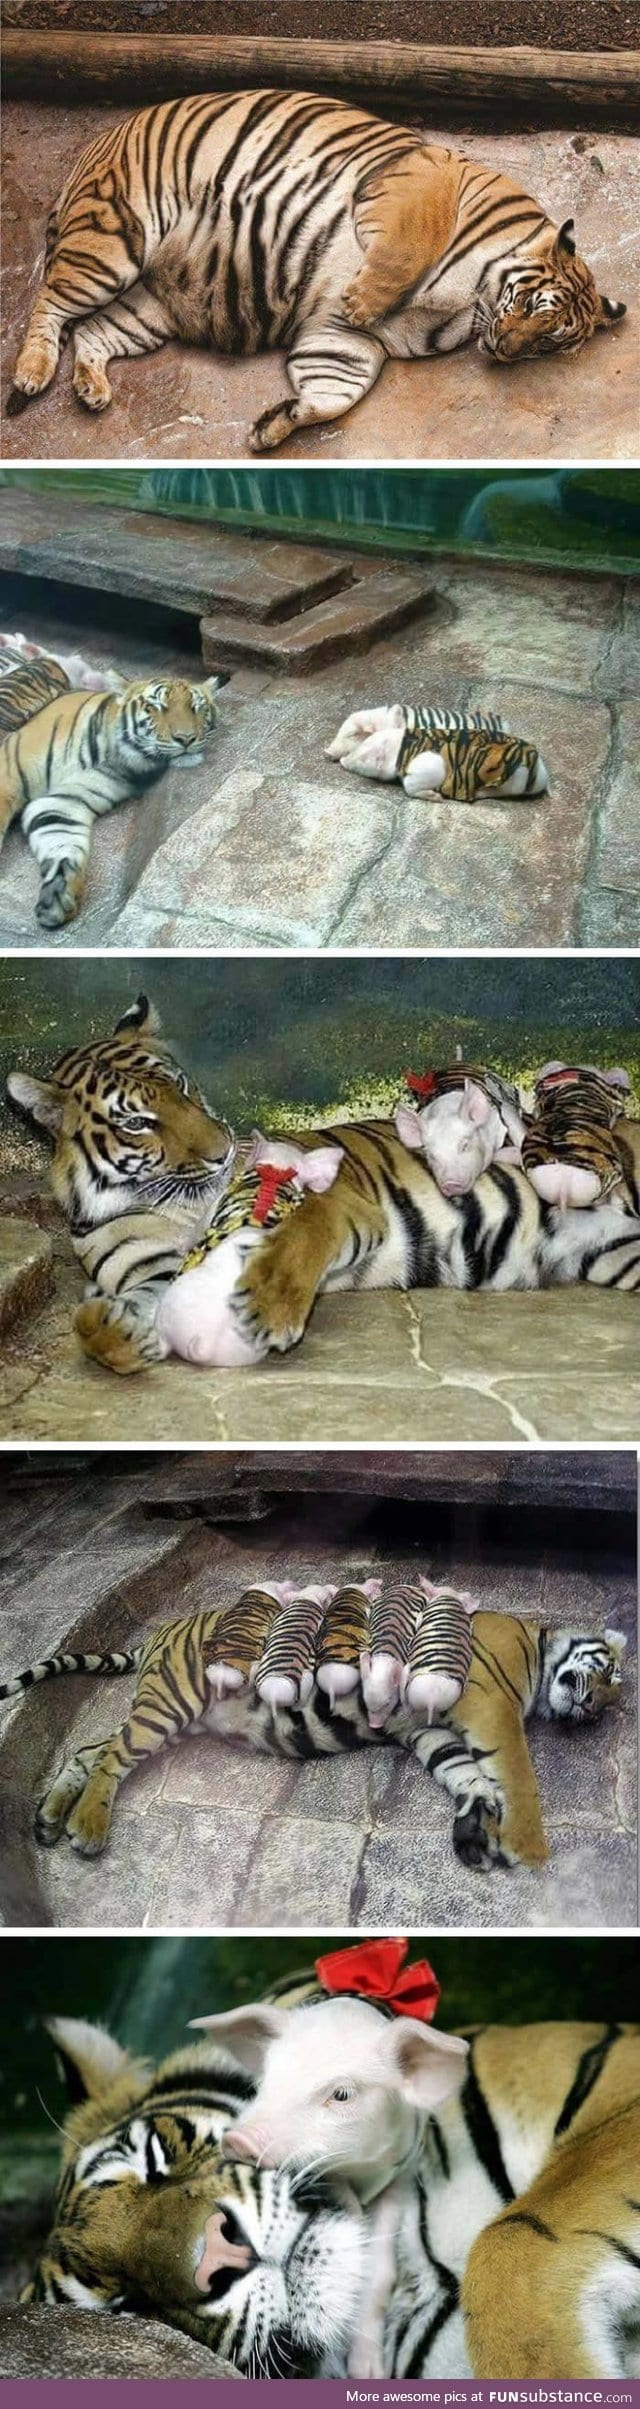 Zookeepers use piglets in tiger stripes to comfort a tigress who lost her cubs